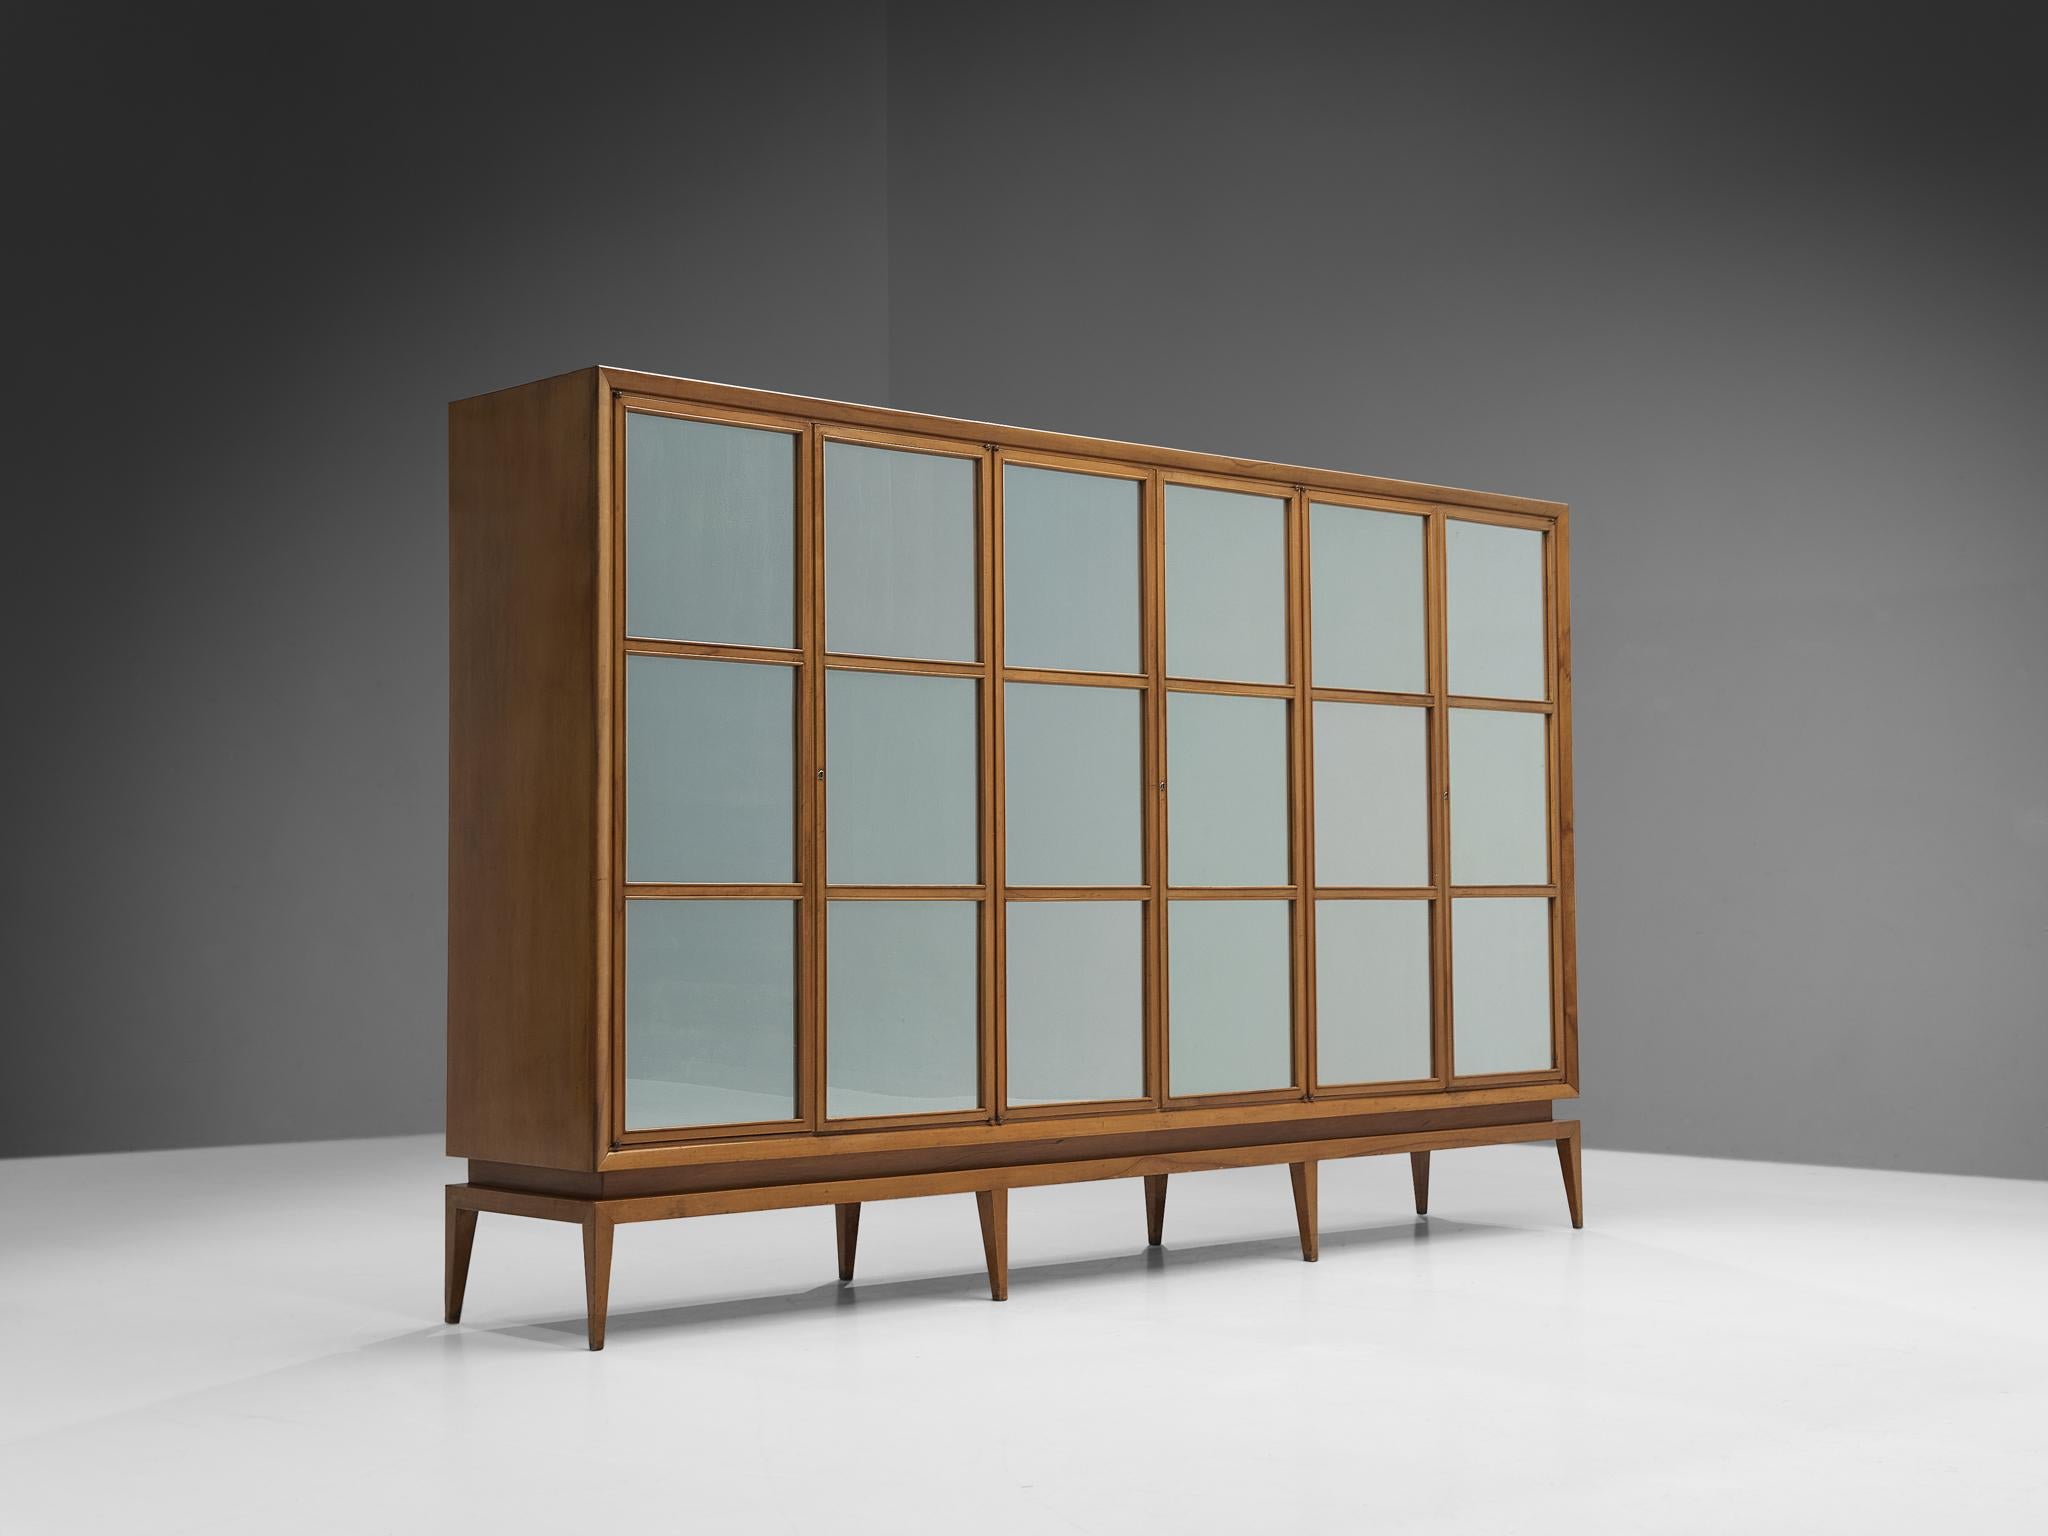 Guglielmo Ulrich, wardrobe, walnut, mirrored glass, maple, Italy, 1940s. 

This large wardrobe designed by Guglielmo Ulrich convinces visually through its geometrical shapes and graphical doors complemented with eighteen square mirrors that